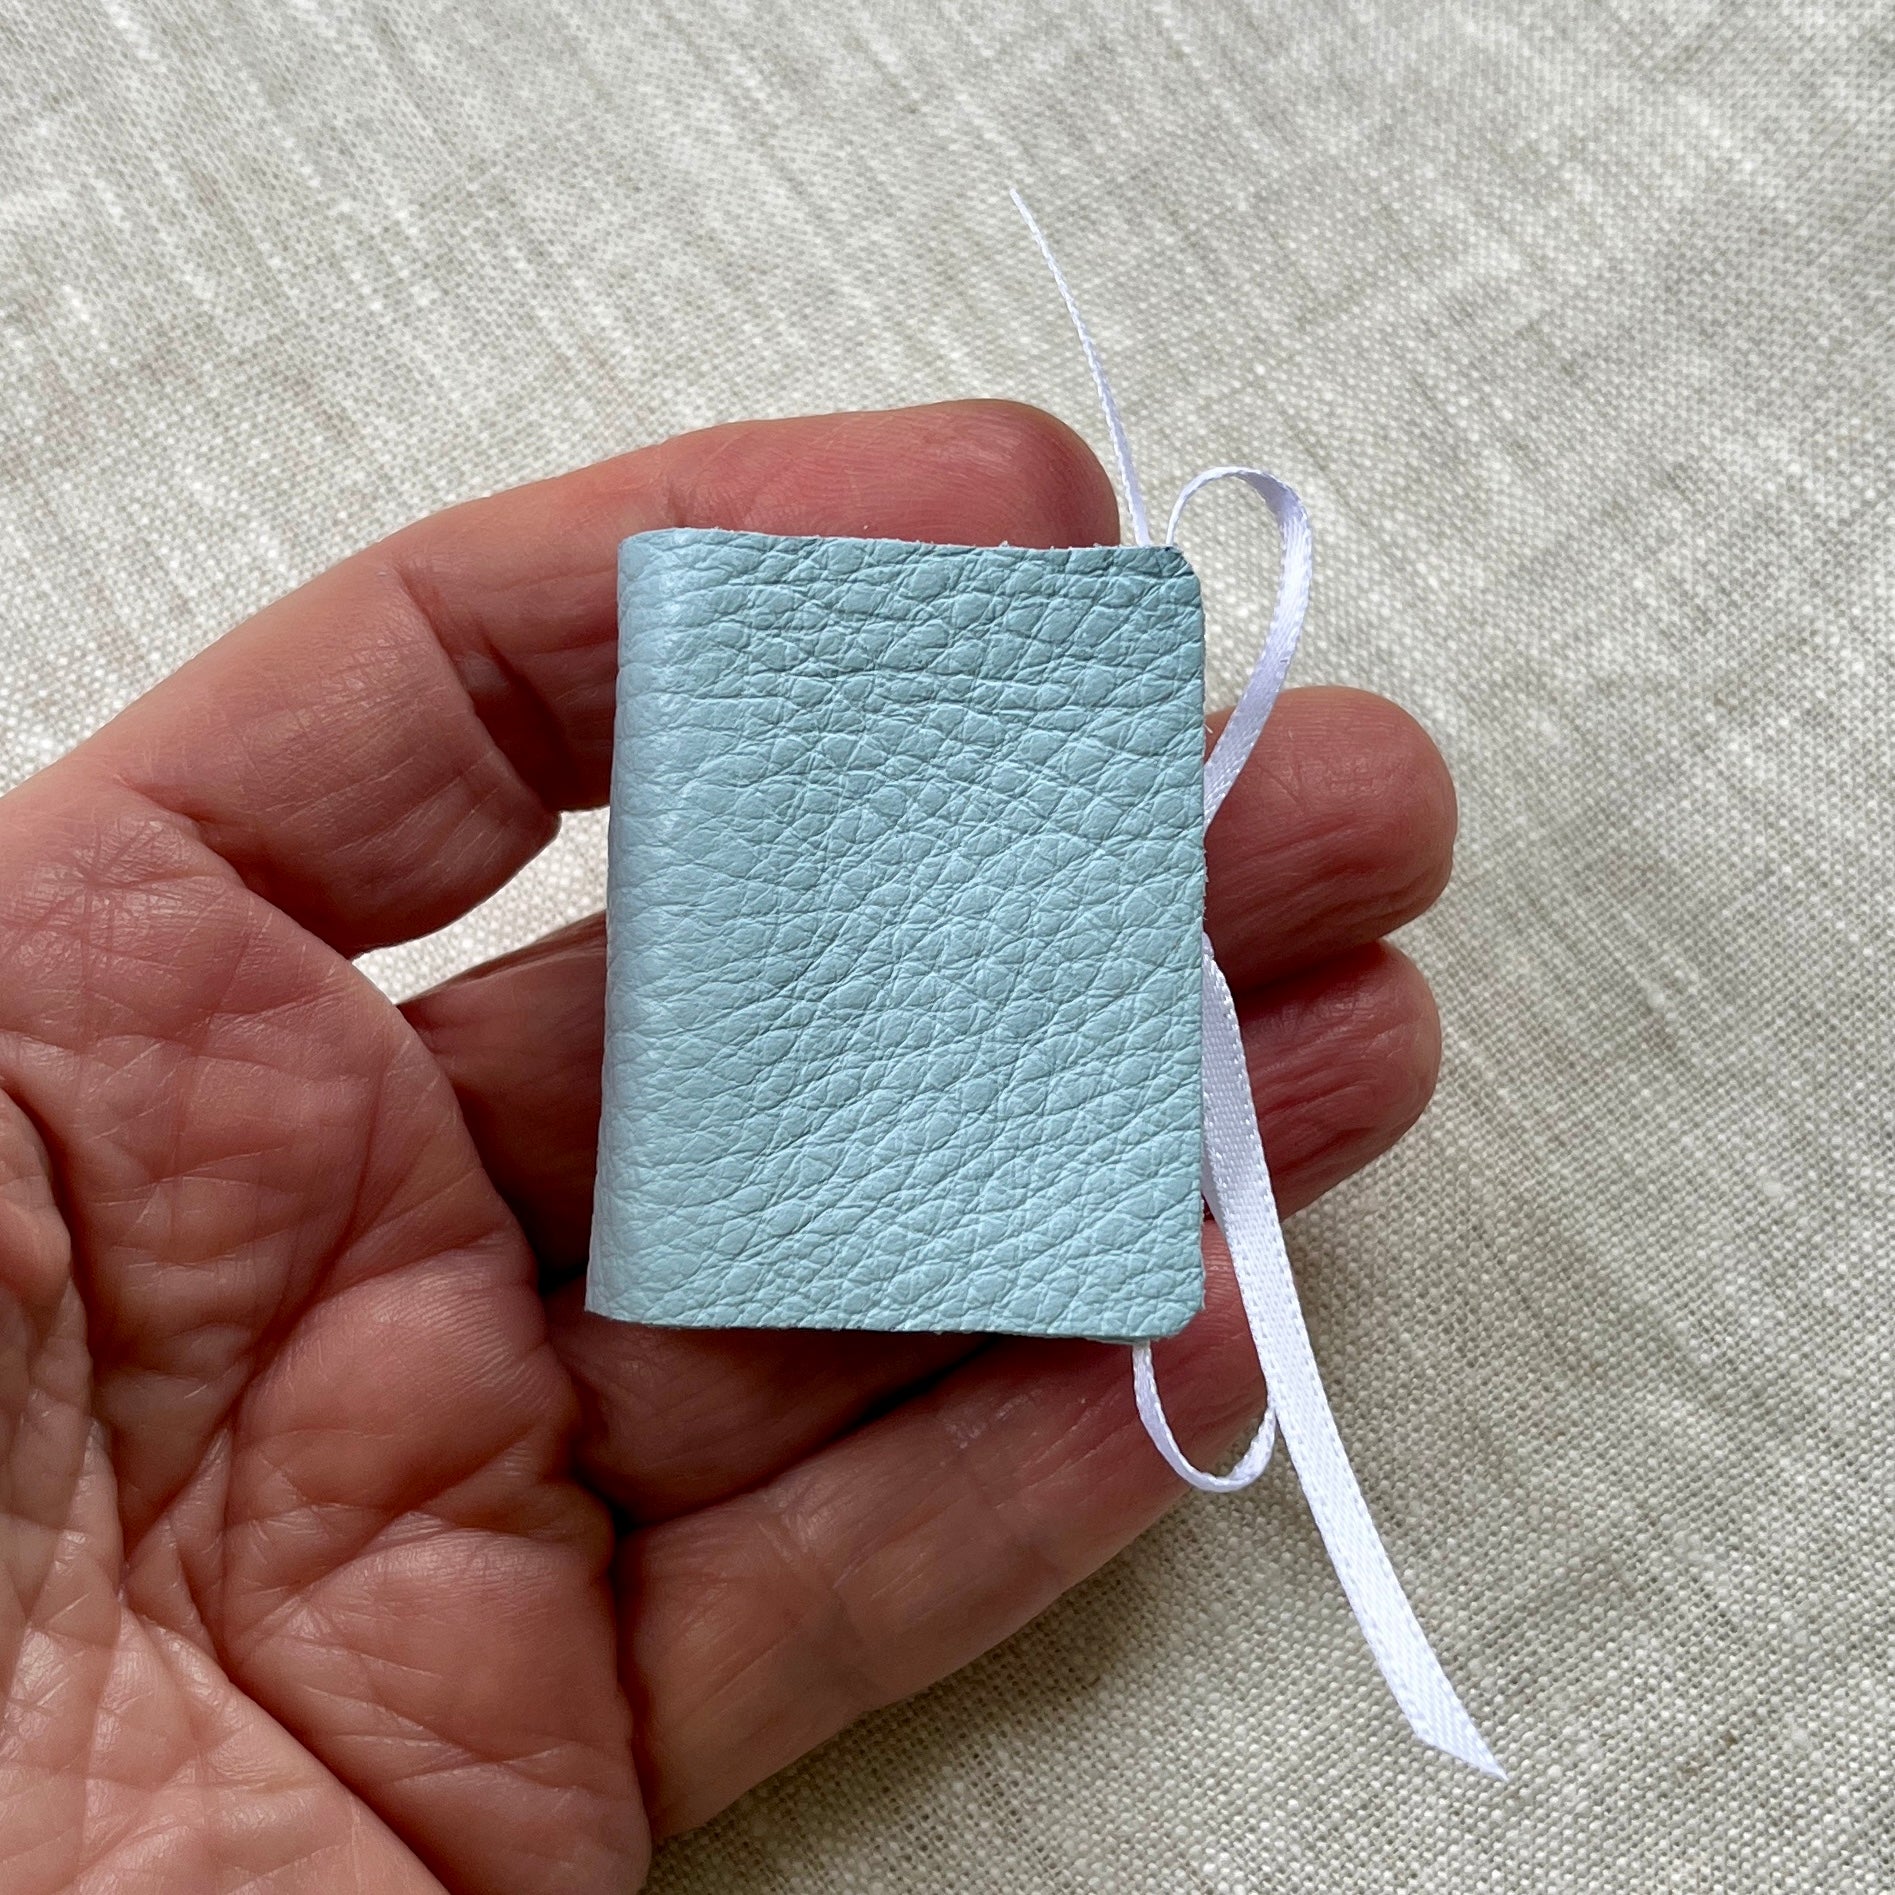 Tiny handmade mini journal in genuine leather - blank pages